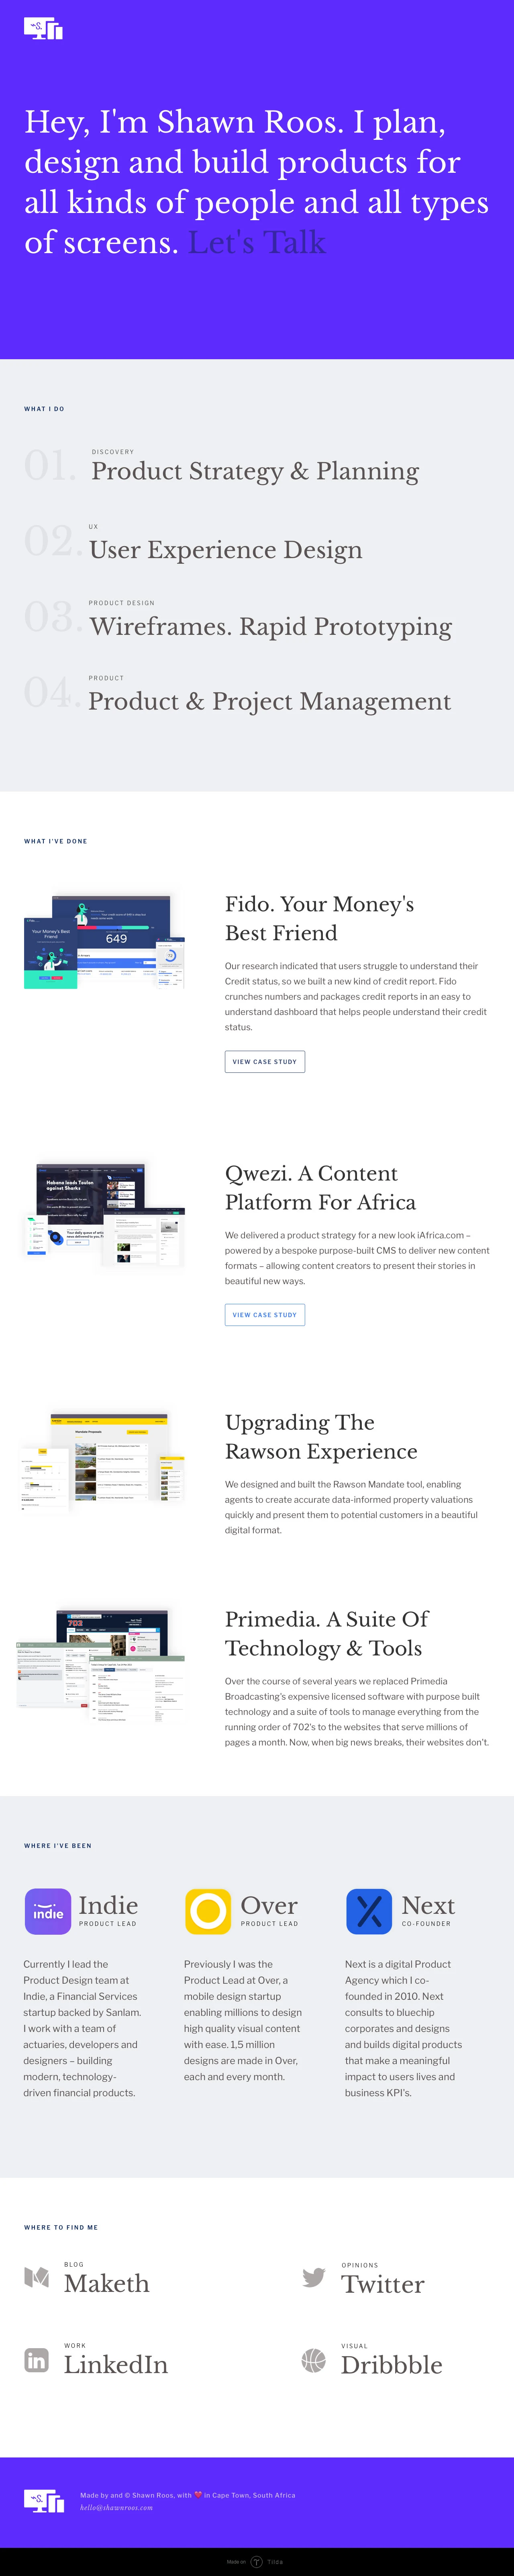 Shawn Roos Landing Page Example: I plan, design and build products for all kinds of people and all types of screens.